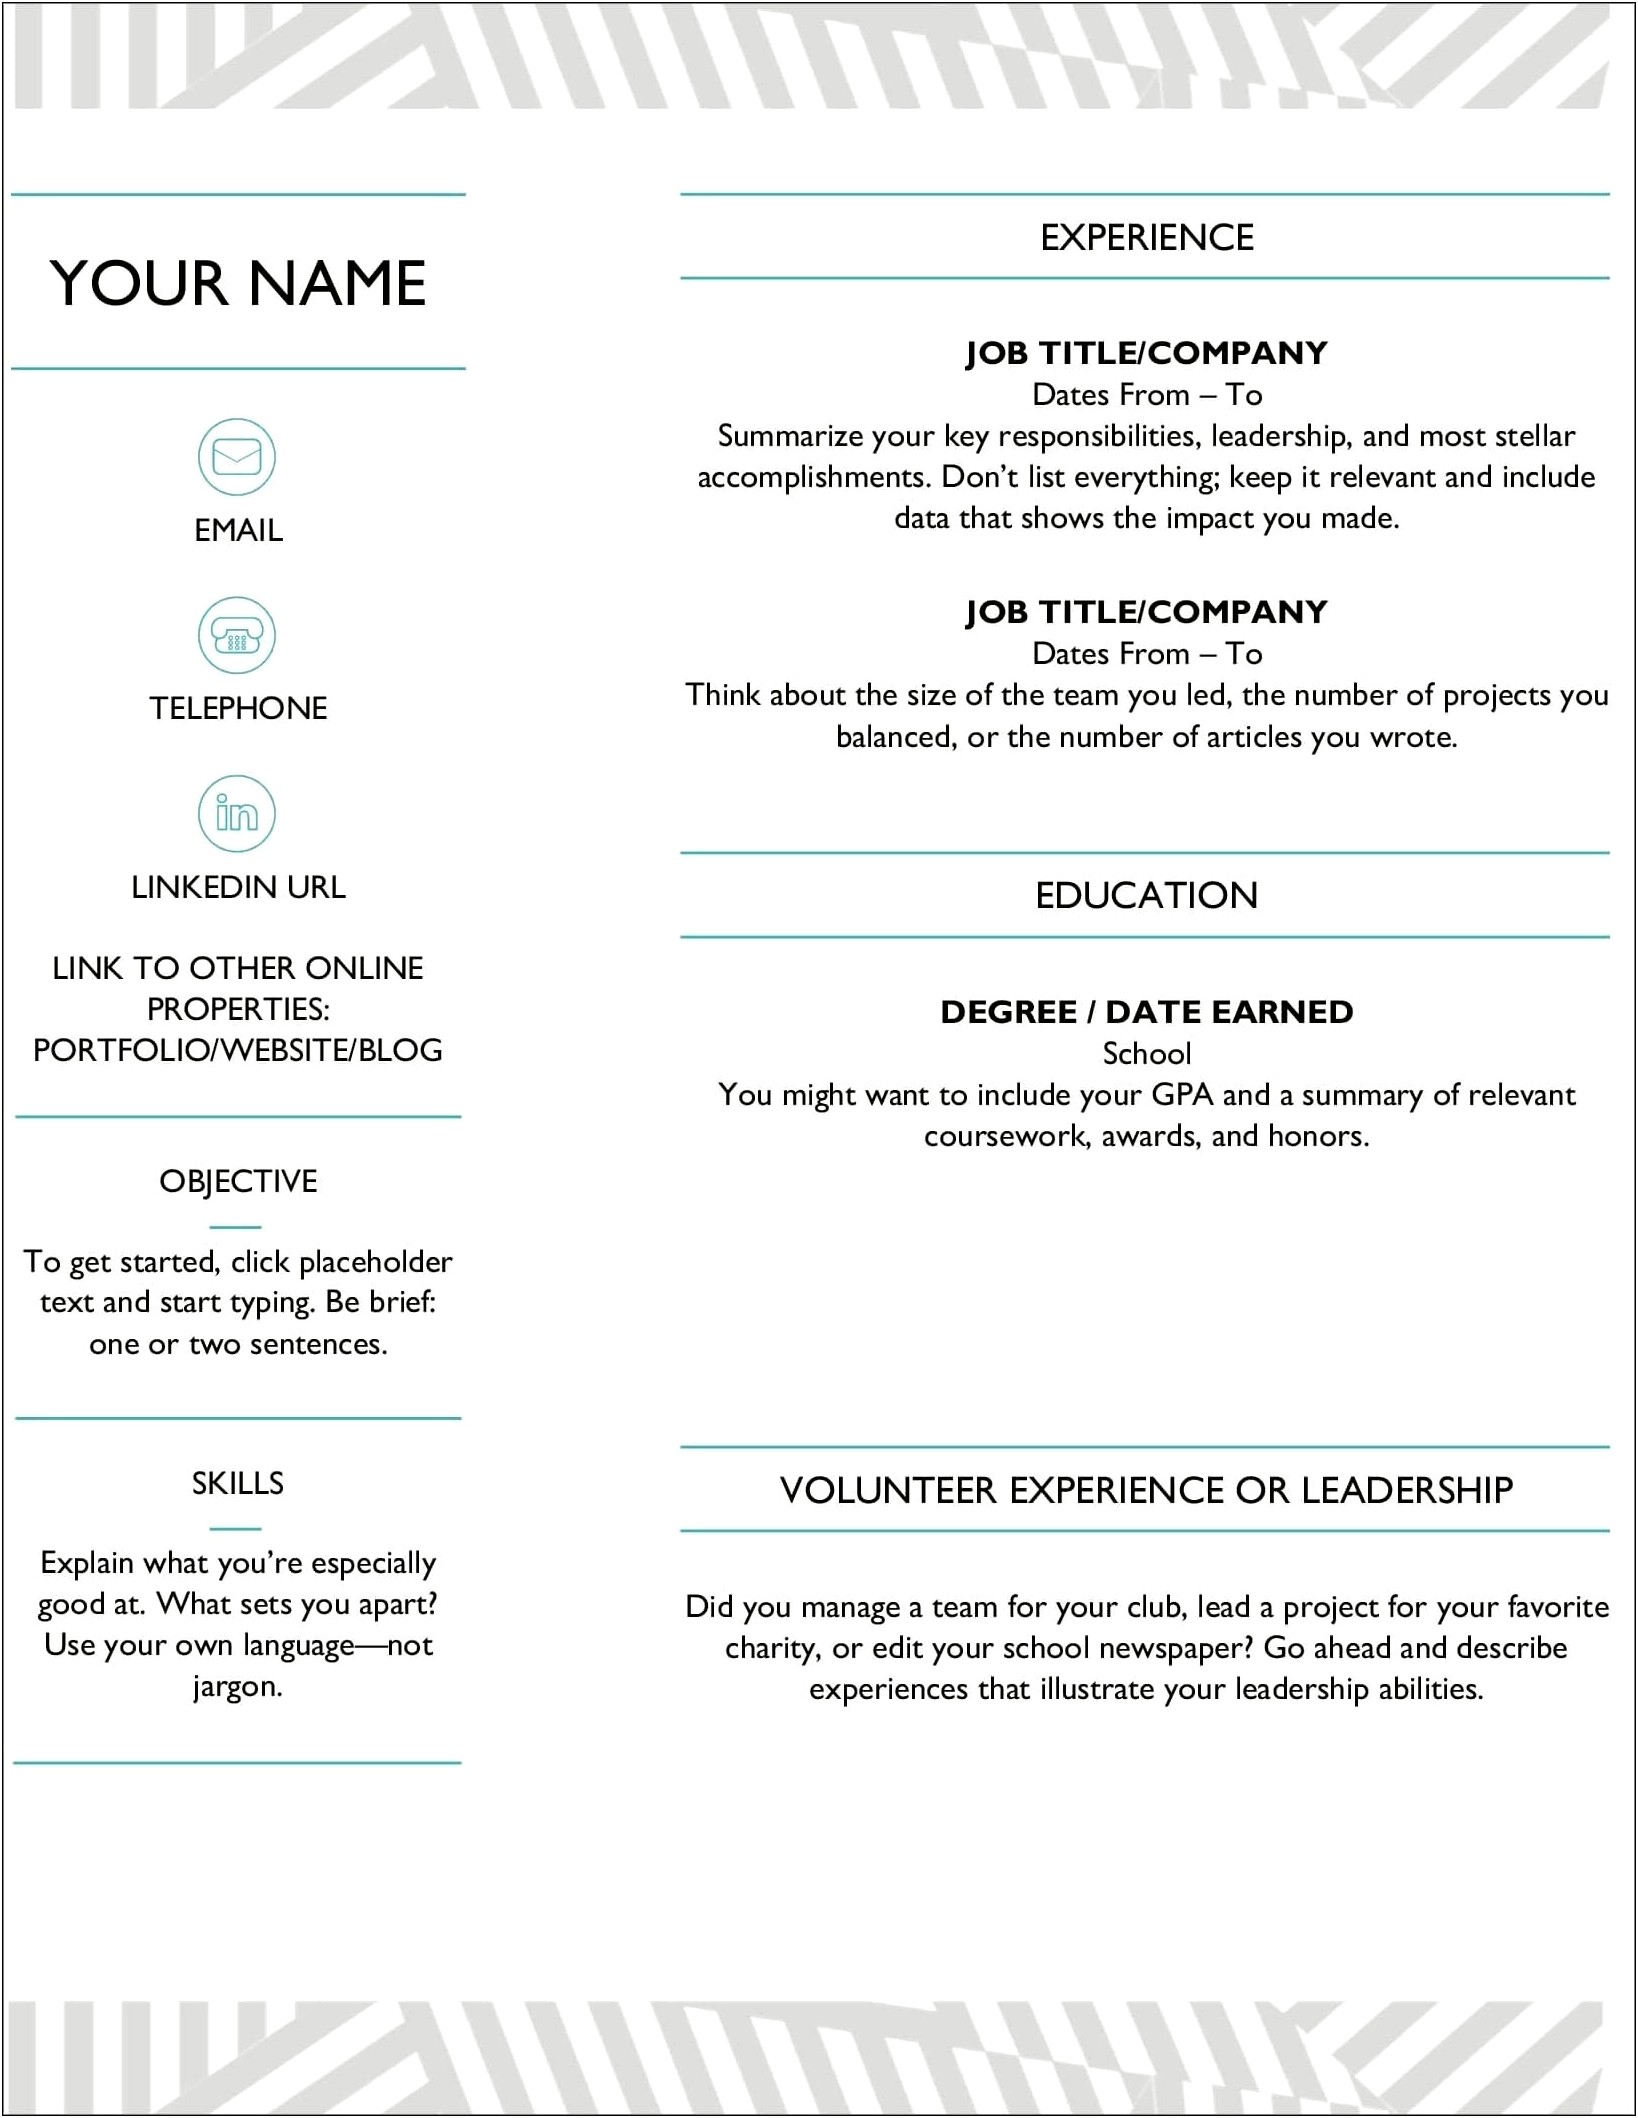 Create Your Own Resume Online Free